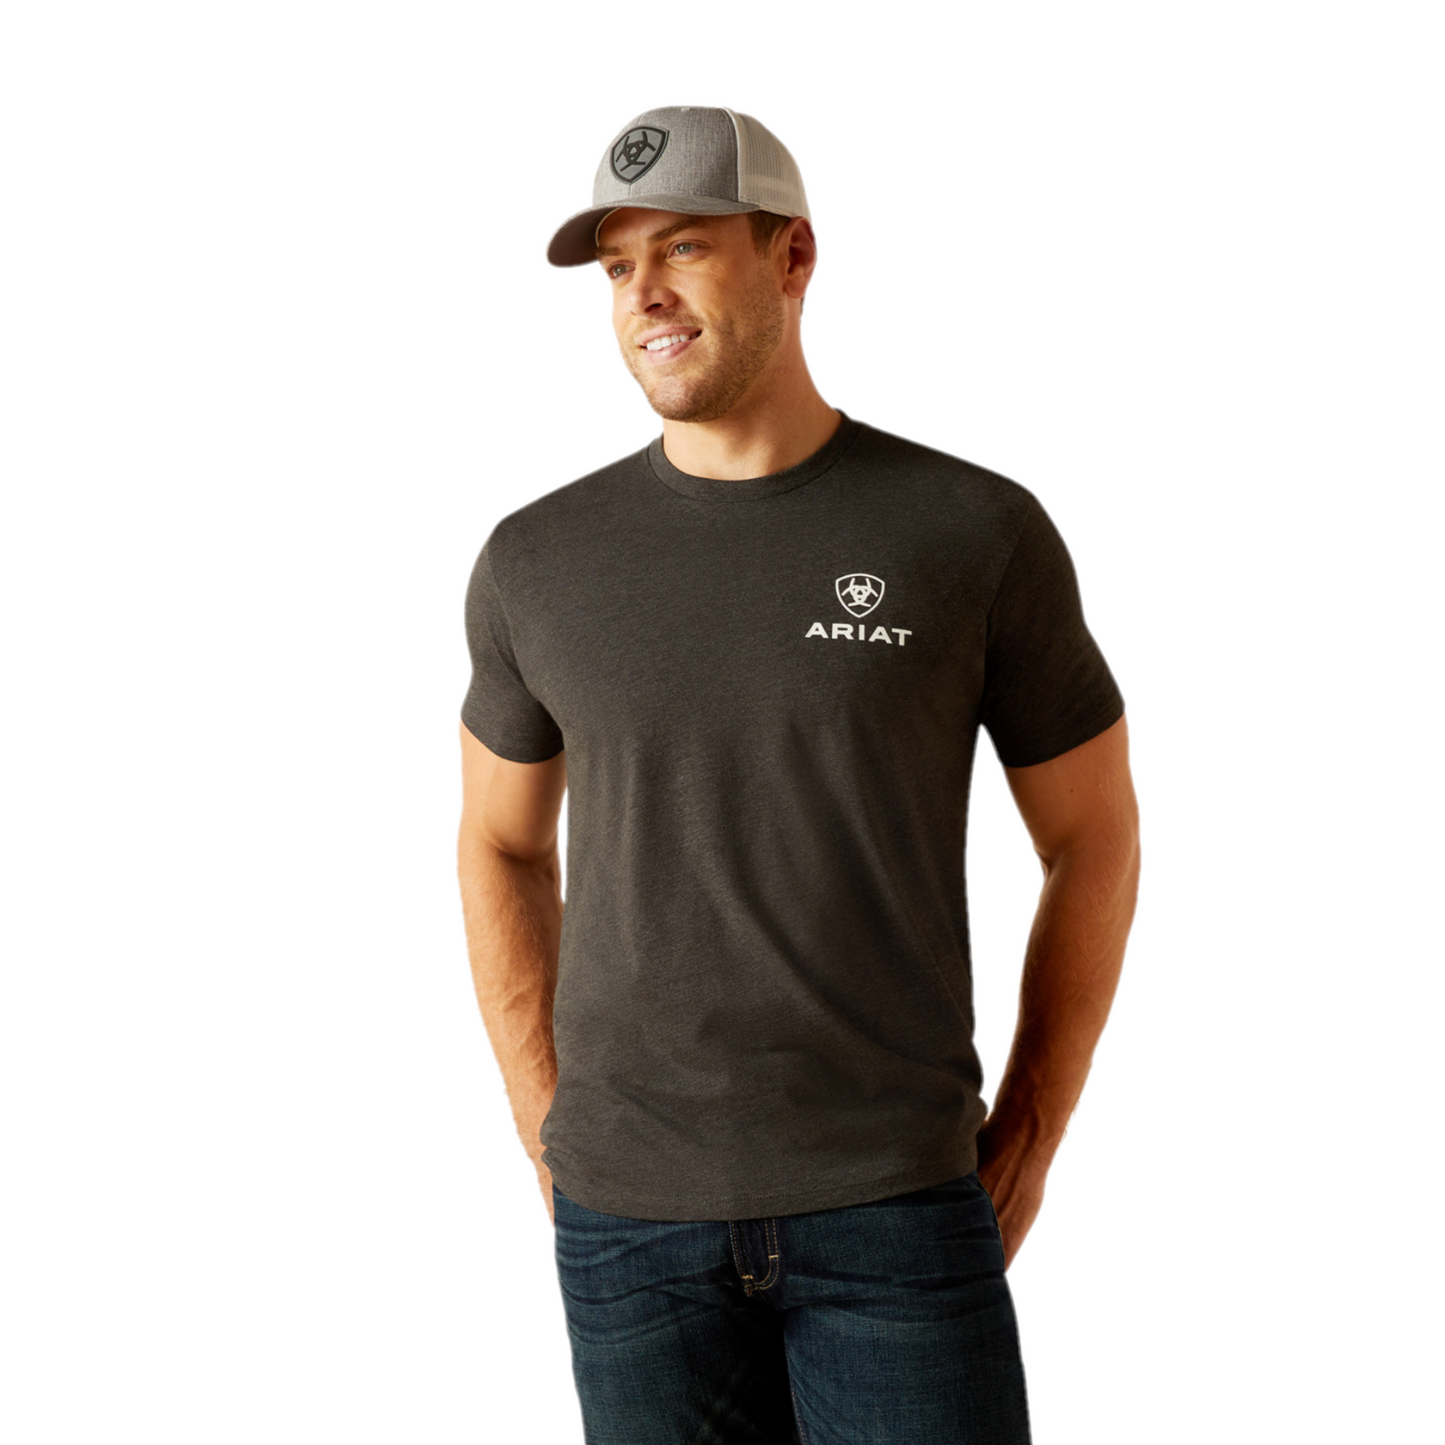 Ariat Men's Star Spangled Charcoal Heather T-Shirt 10051453